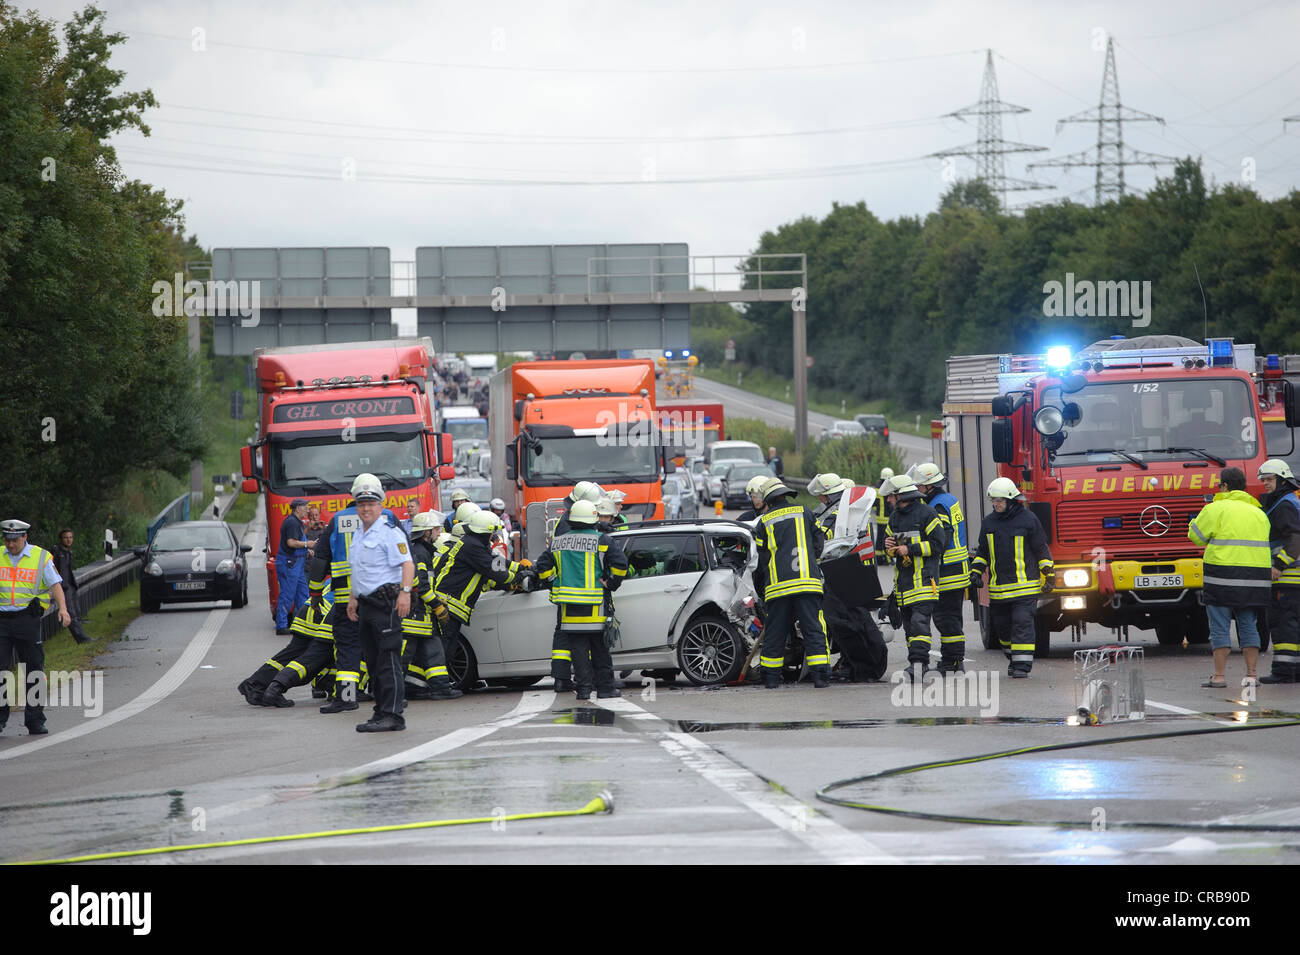 Firefighters in a rescue operations following a serious road traffic accident on the Autobahn A81 motorway, Ludwigsburg Stock Photo